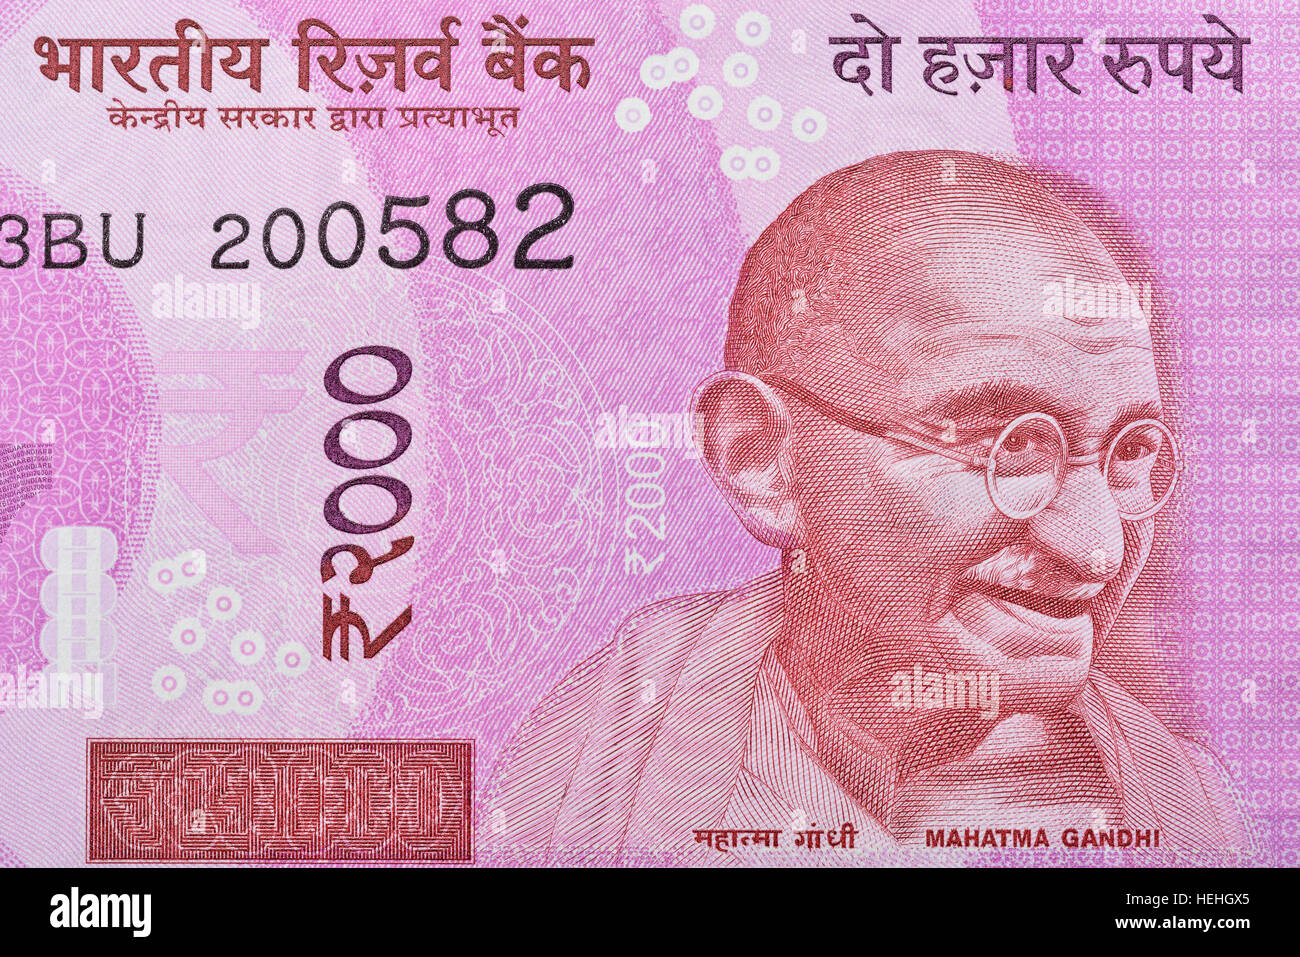 Indian Two Thousand Rupee Note with Mahatma Gandhi Portrait Stock Photo